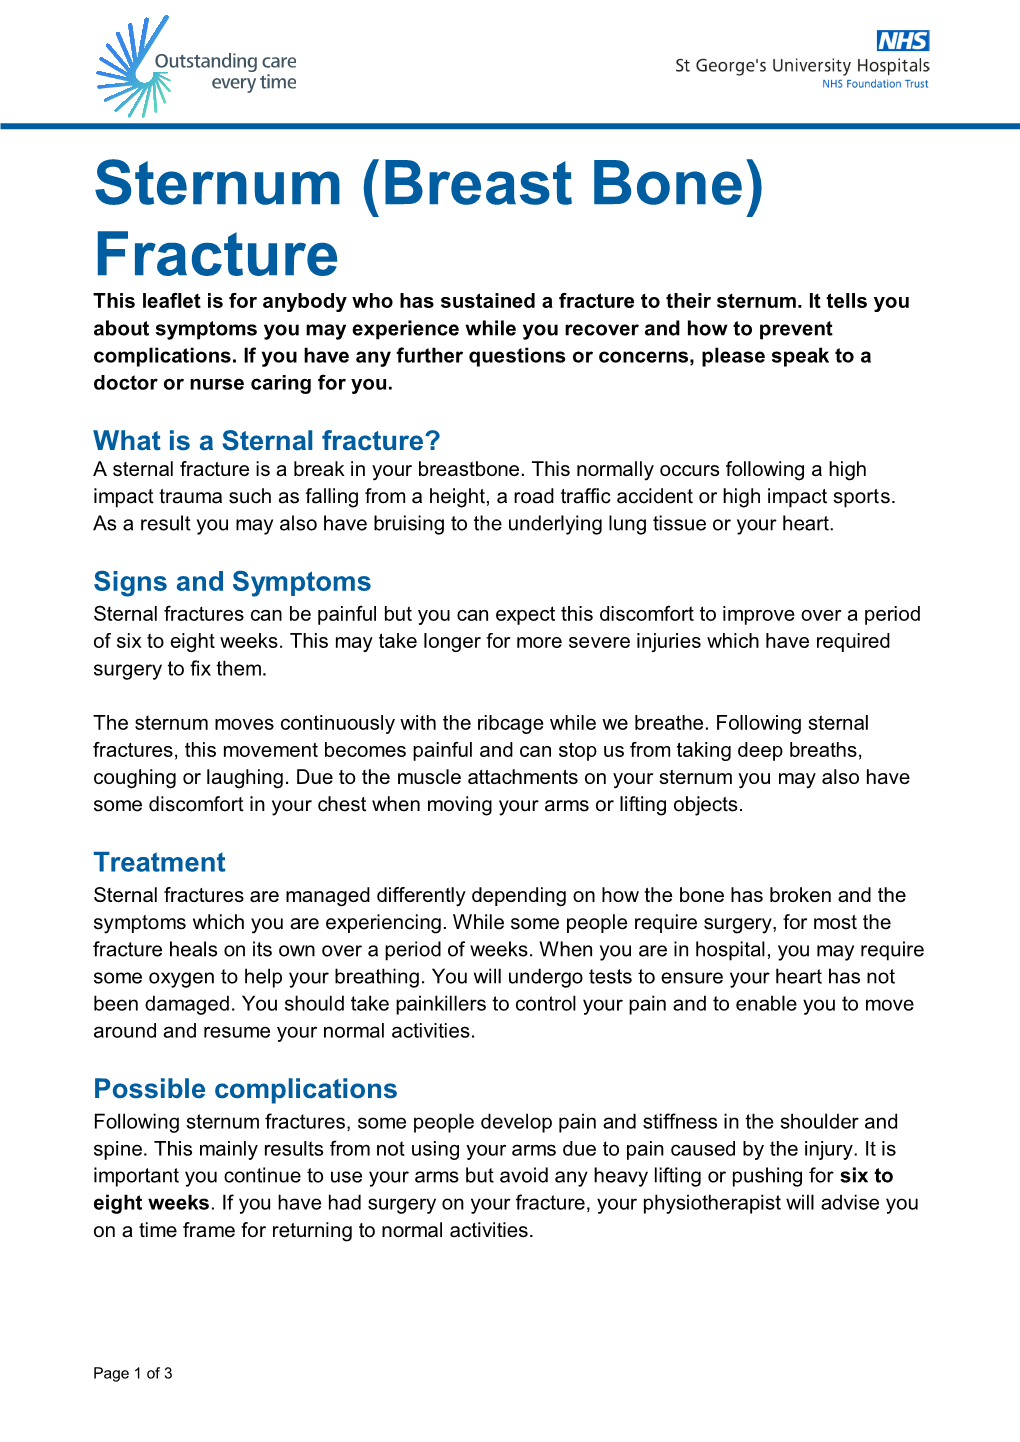 Sternum (Breast Bone) Fracture This Leaflet Is for Anybody Who Has Sustained a Fracture to Their Sternum